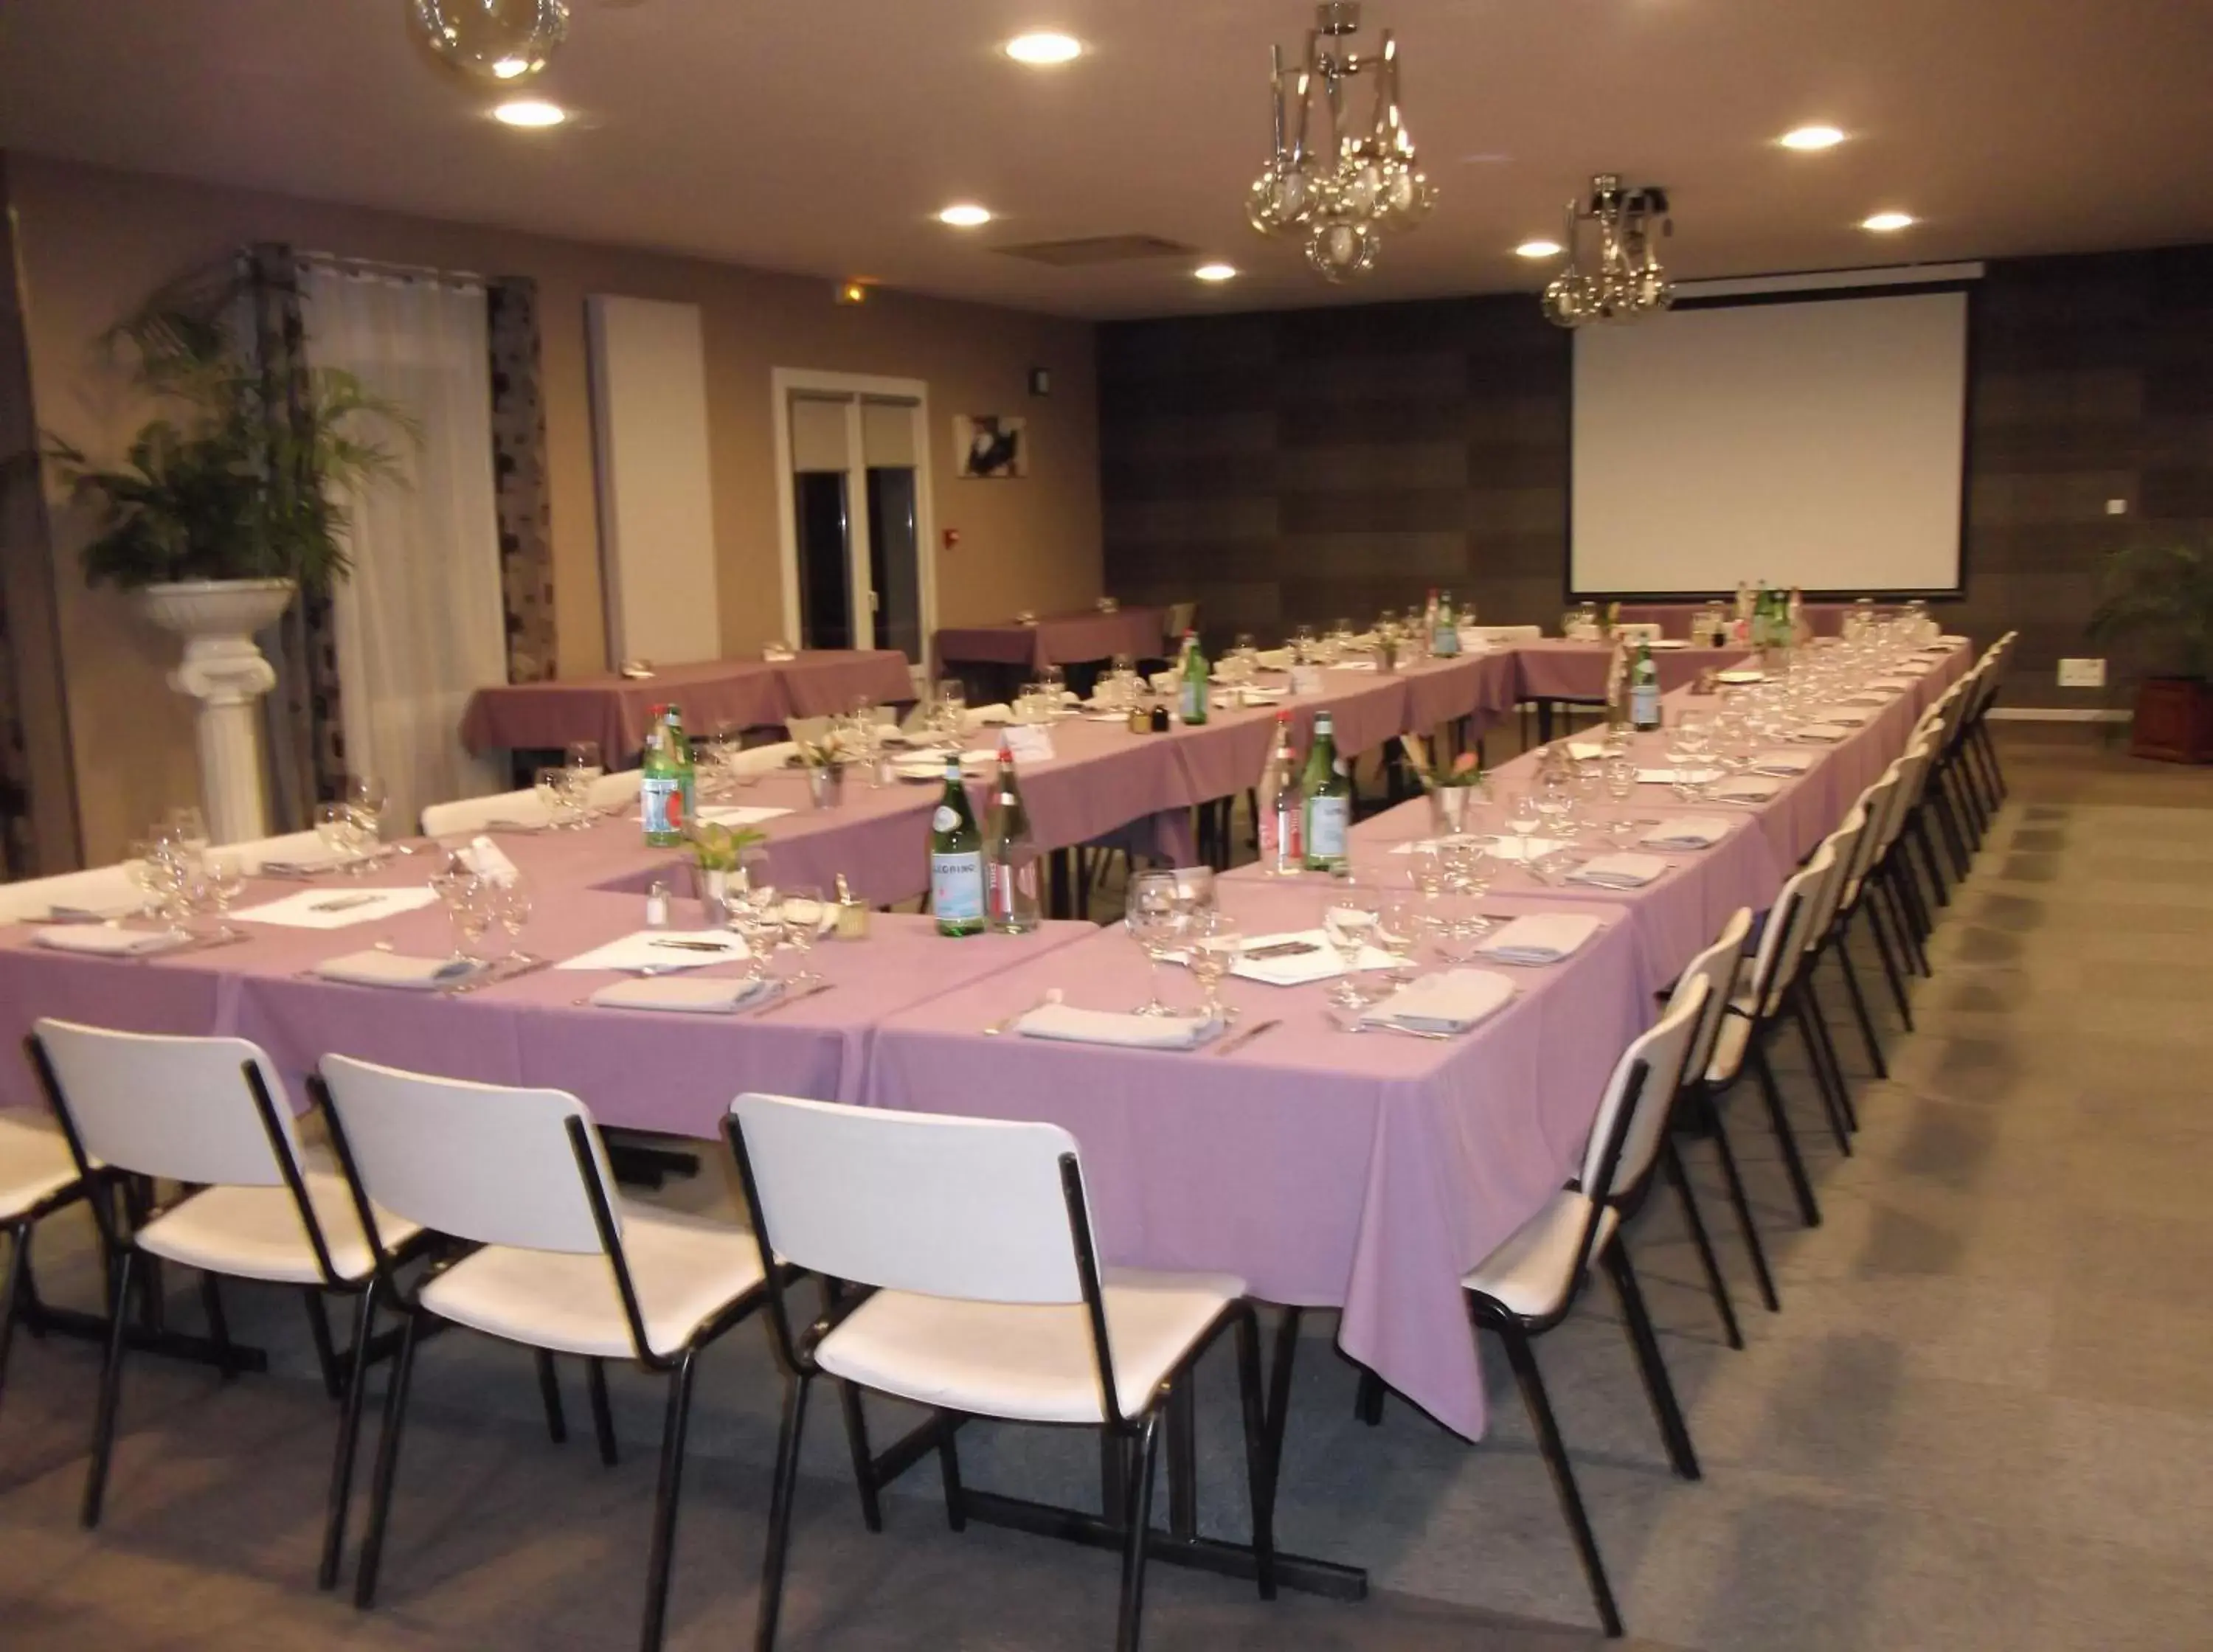 Business facilities in Kyriad Auxerre Appoigny